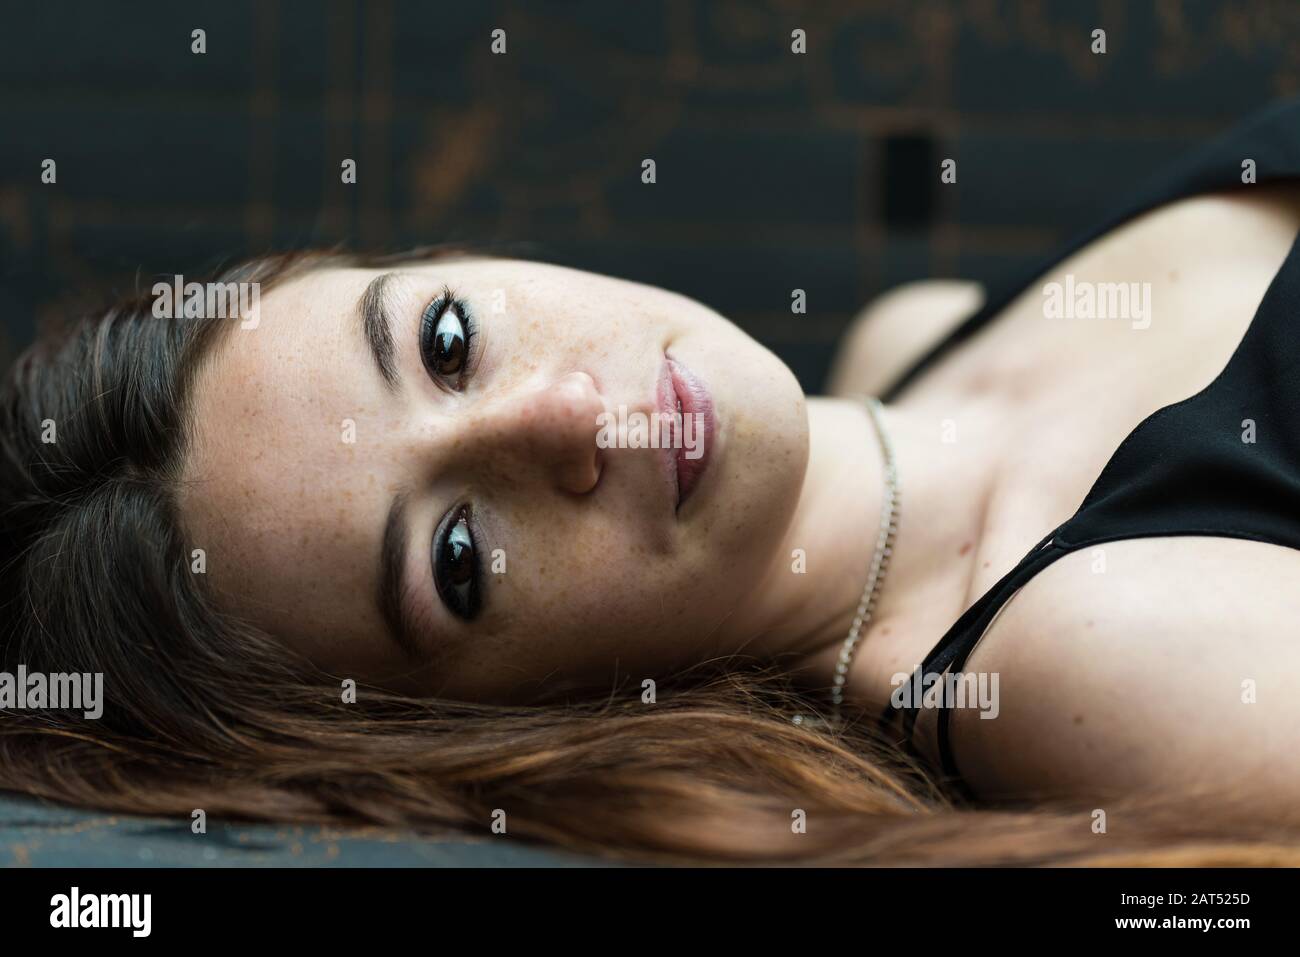 Headshot of an 18 year old cute girl, lying on a coutch and looking shy in the camera Stock Photo